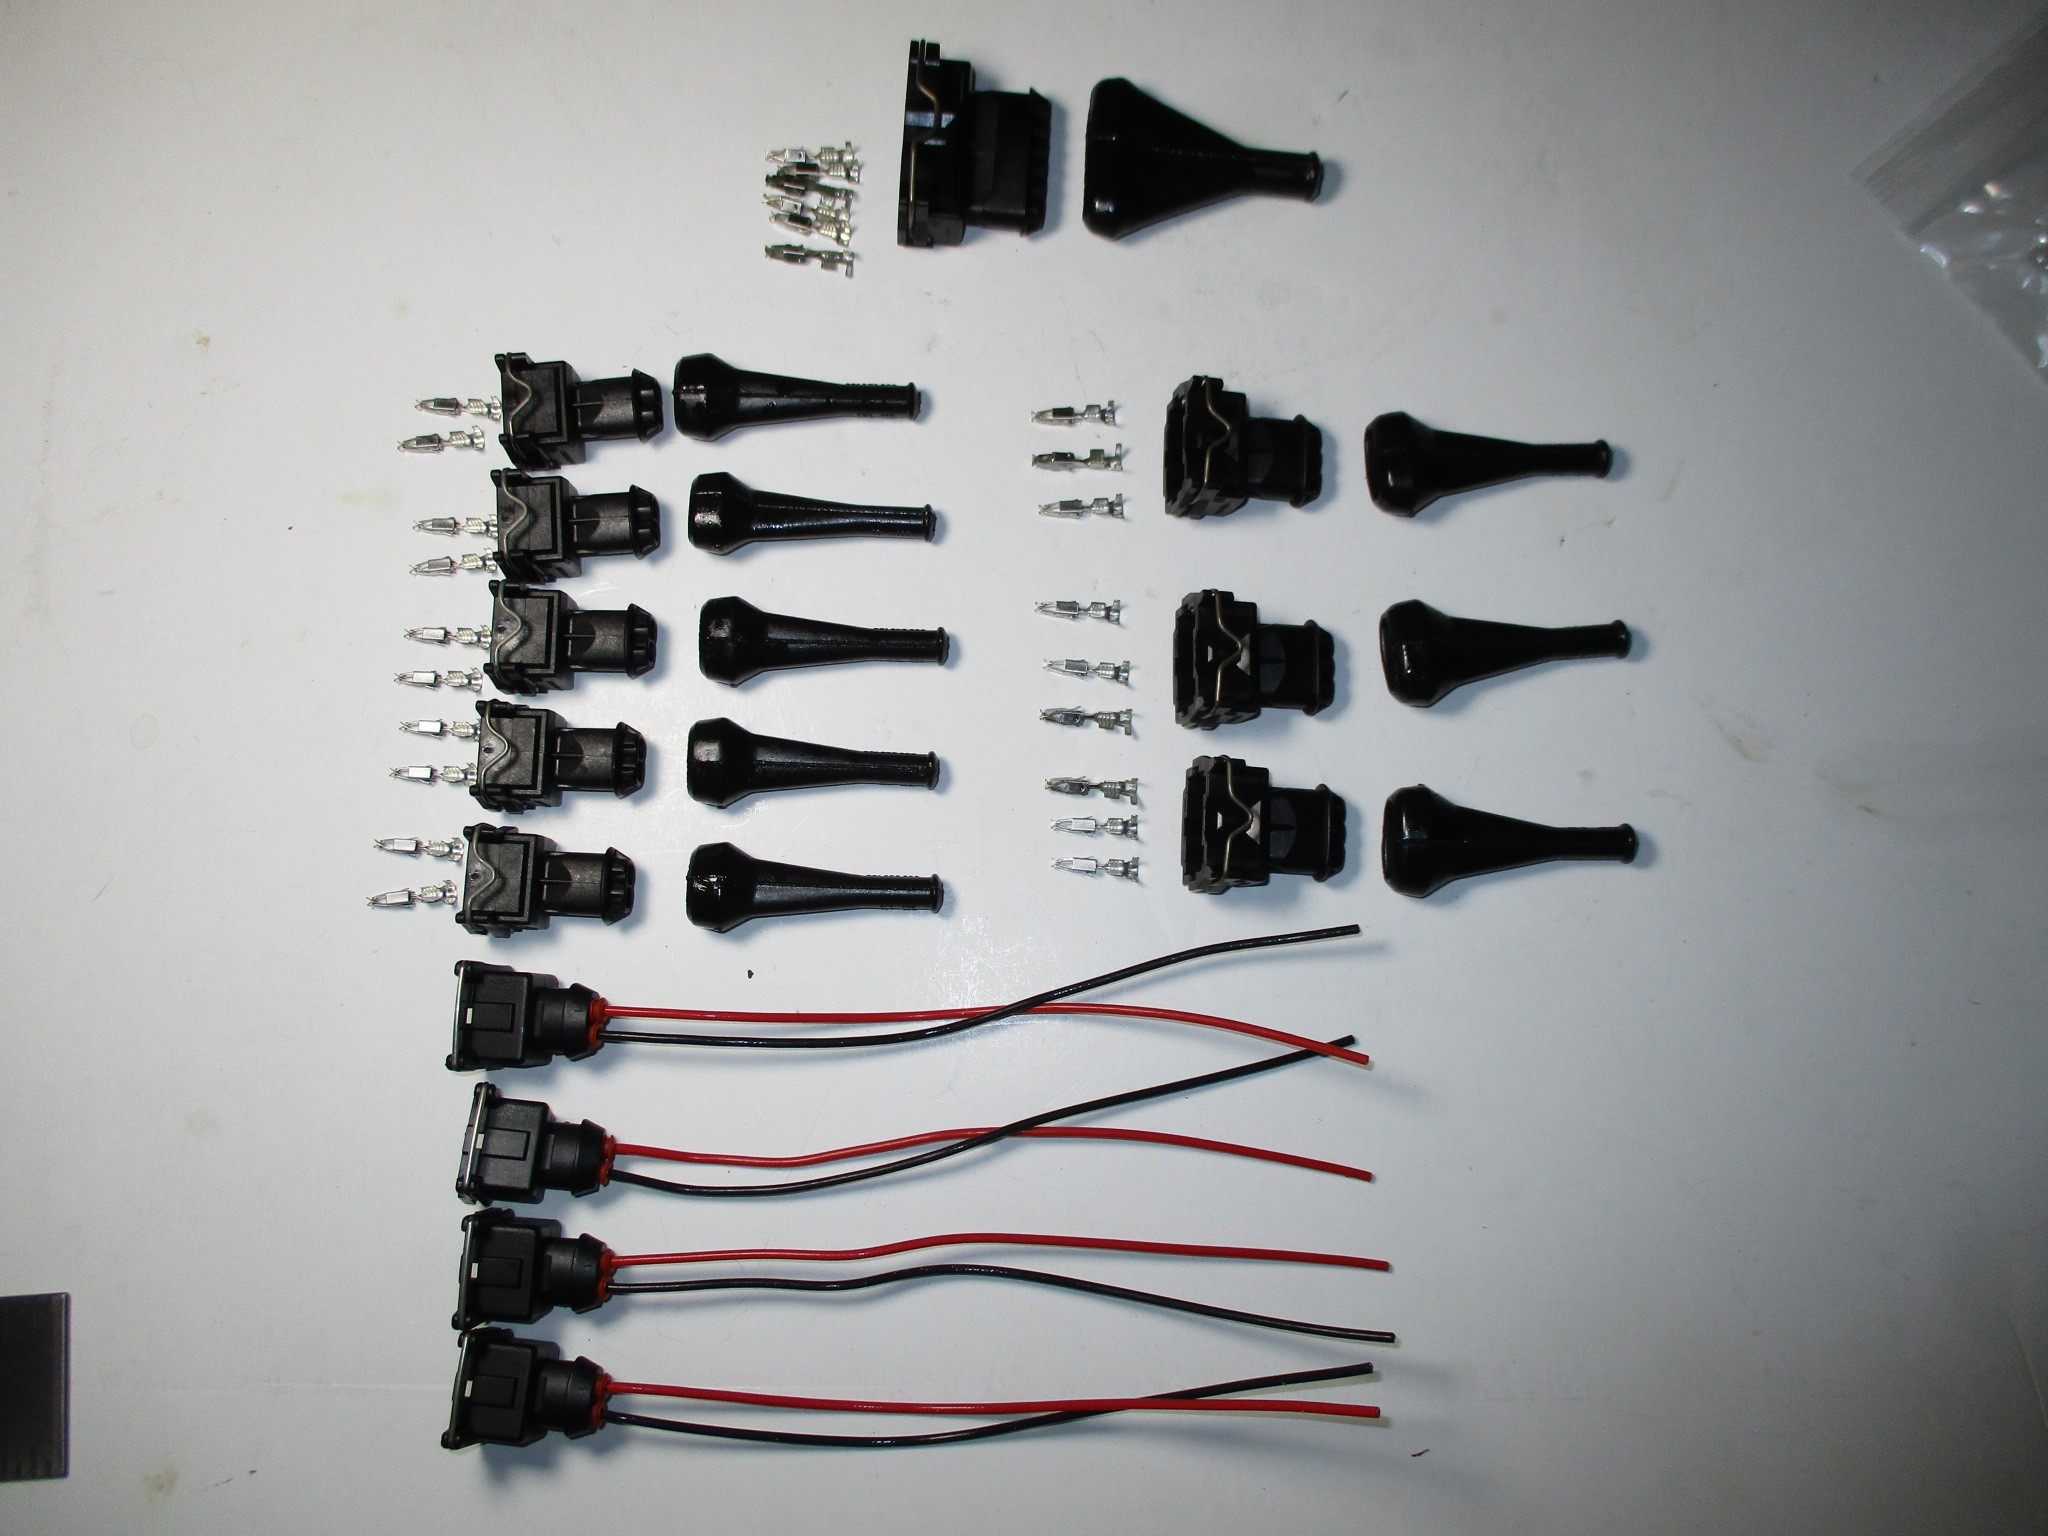 968 engine harness connector kit